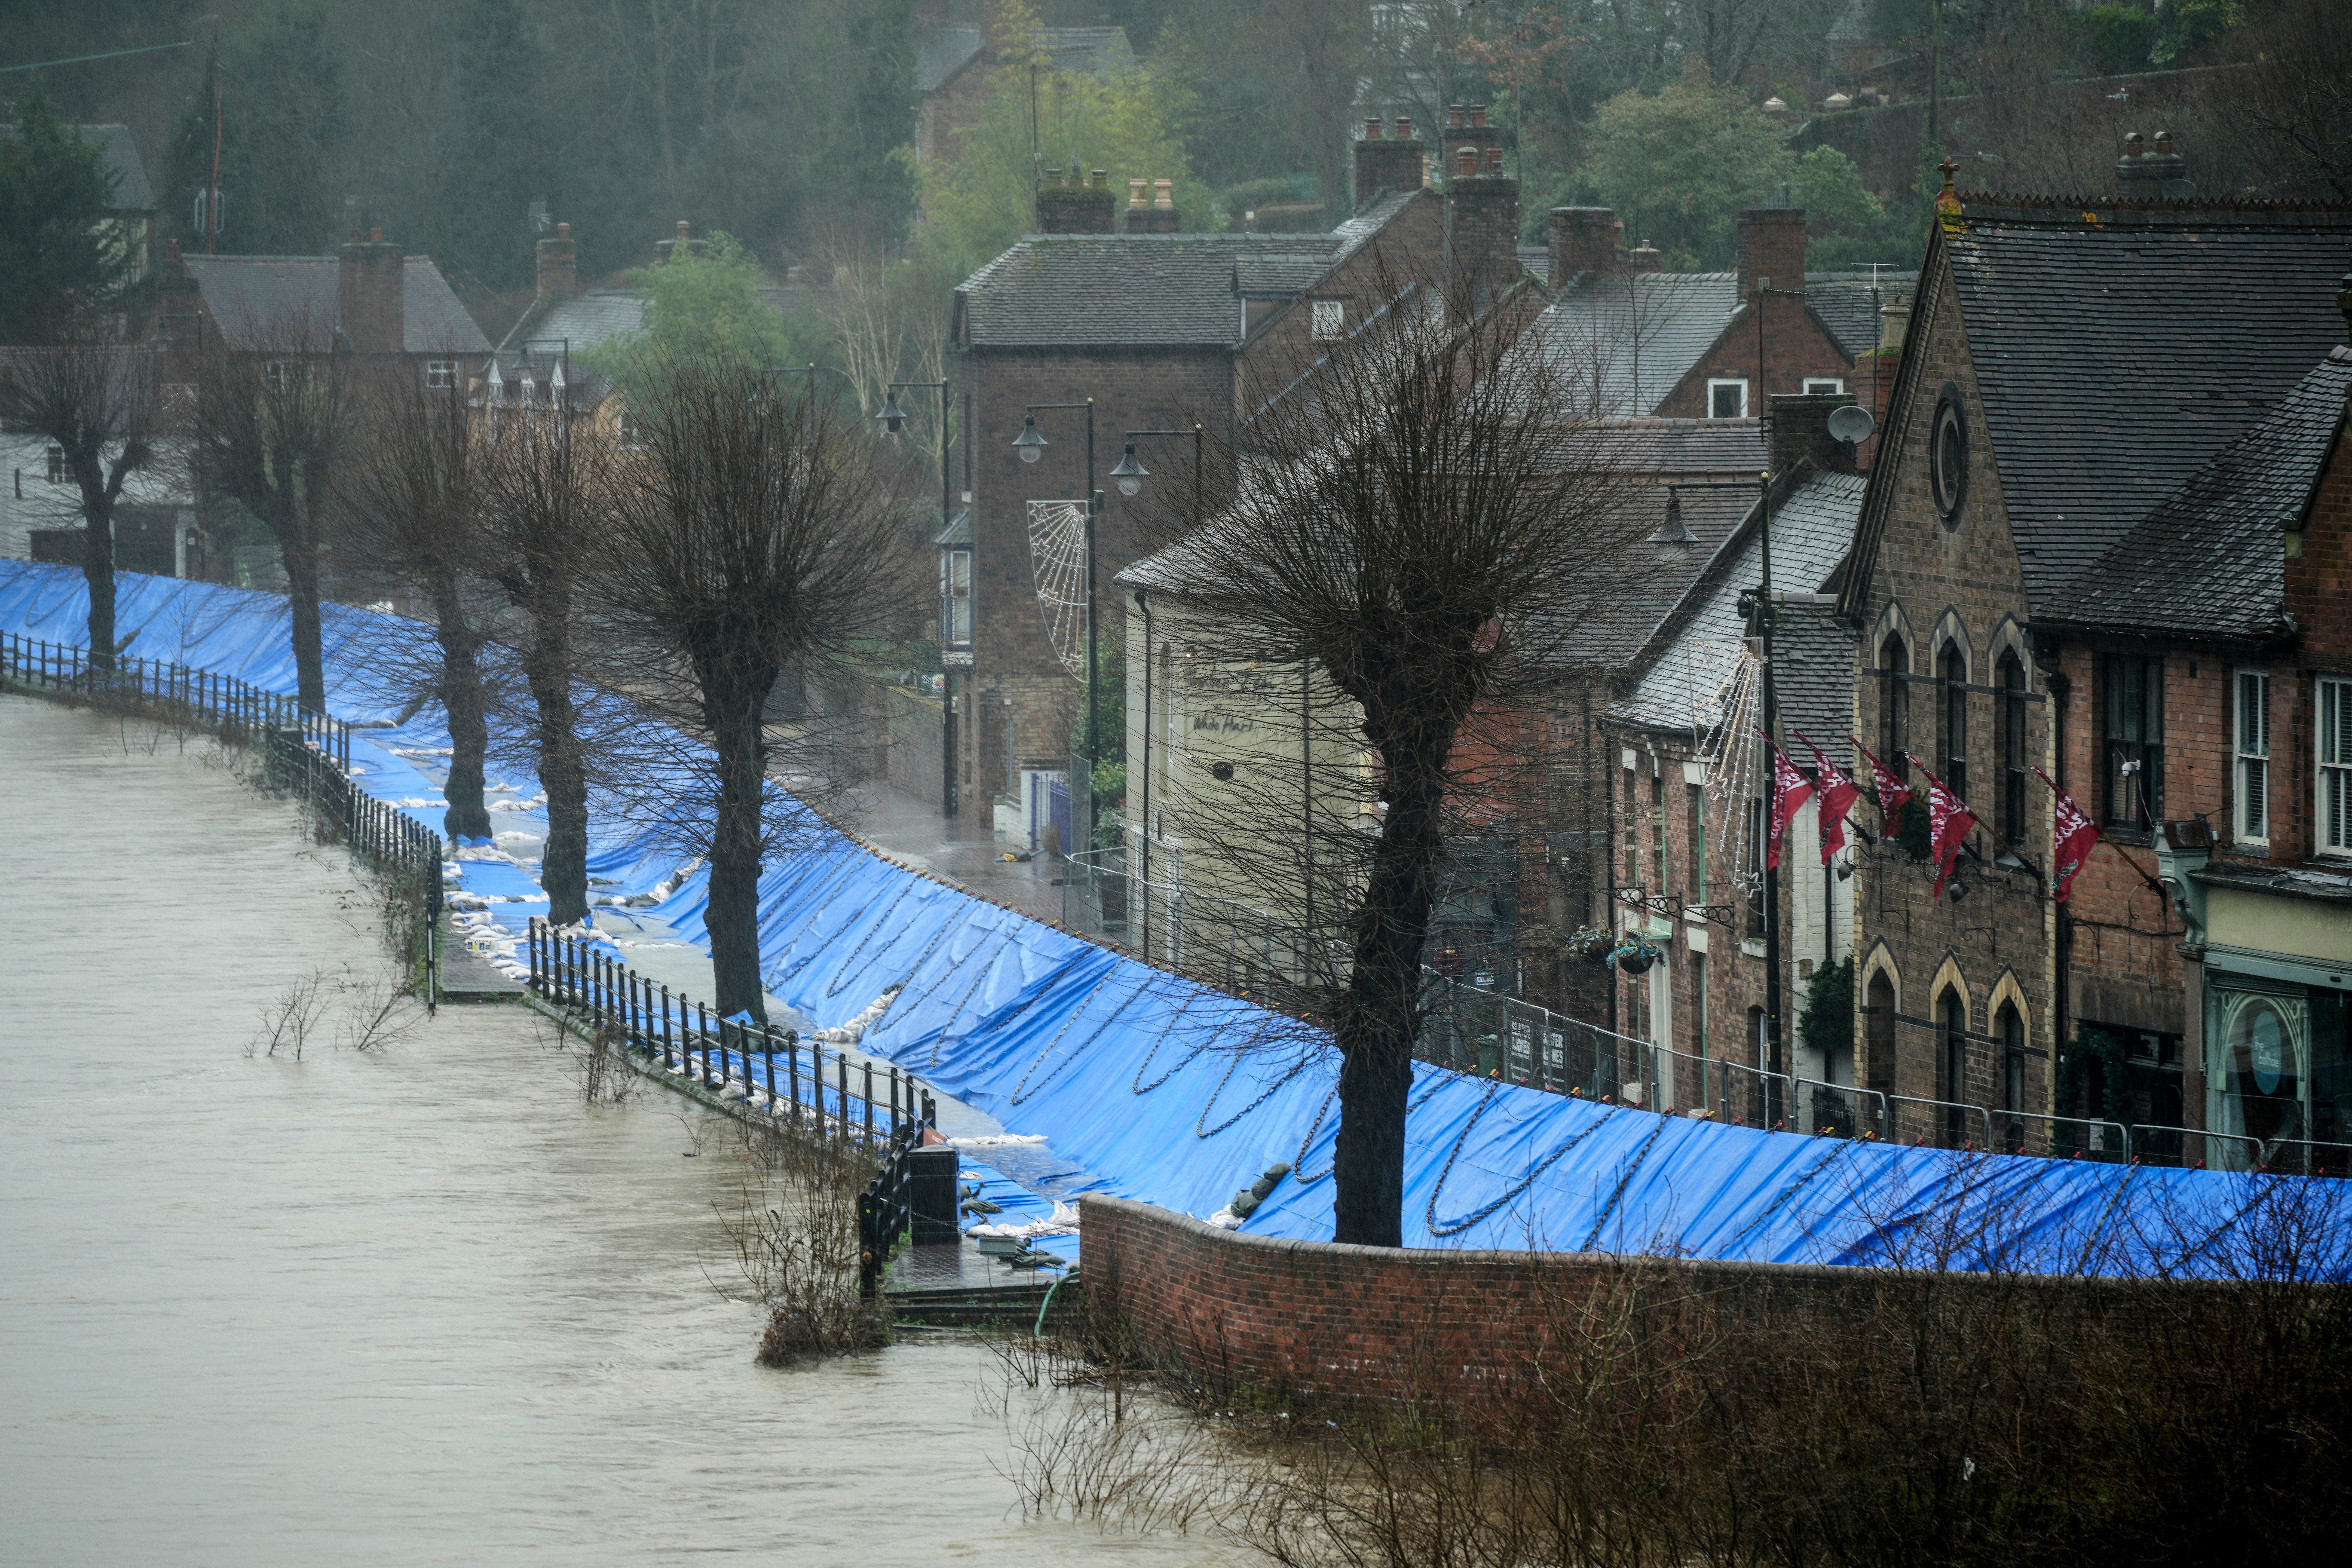 Flood defences were deployed to protect businesses and homes along the river severn on tuesday